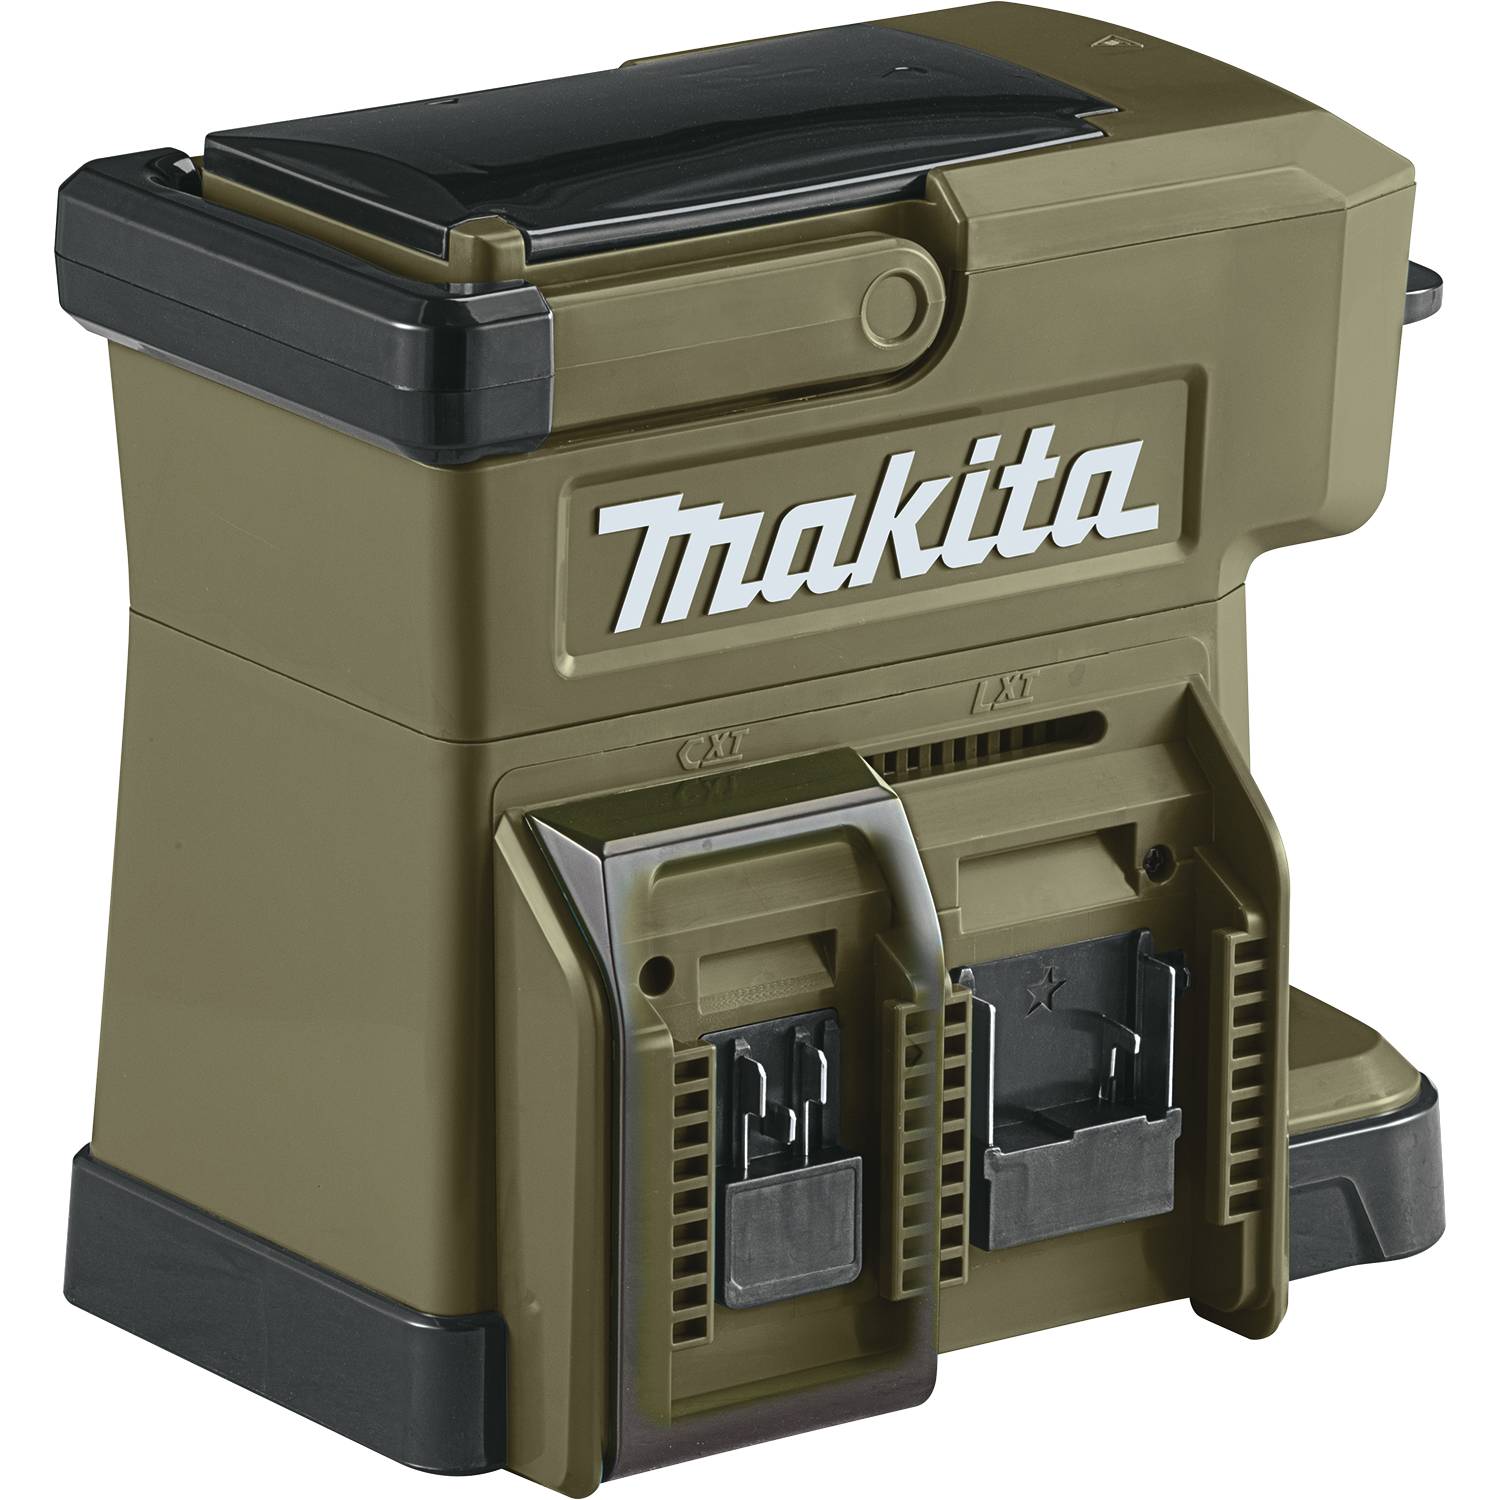 Makita Outdoor Adventure 18V LXT Coffee Maker, Tool Only at Tractor Supply  Co.